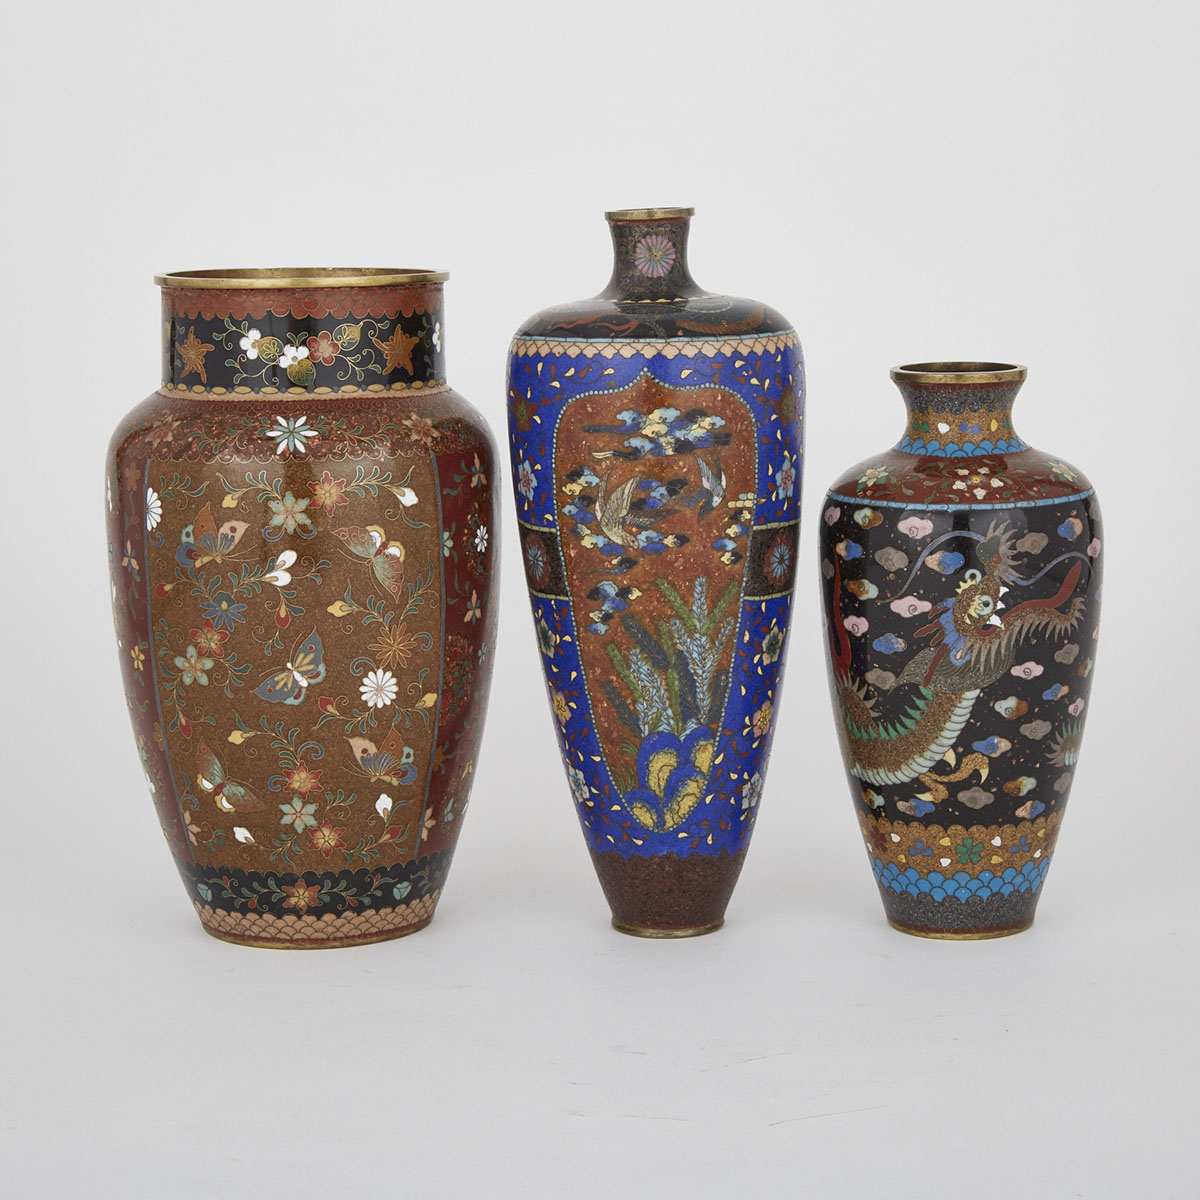 Three Cloisonne Vases, Early 20th Century